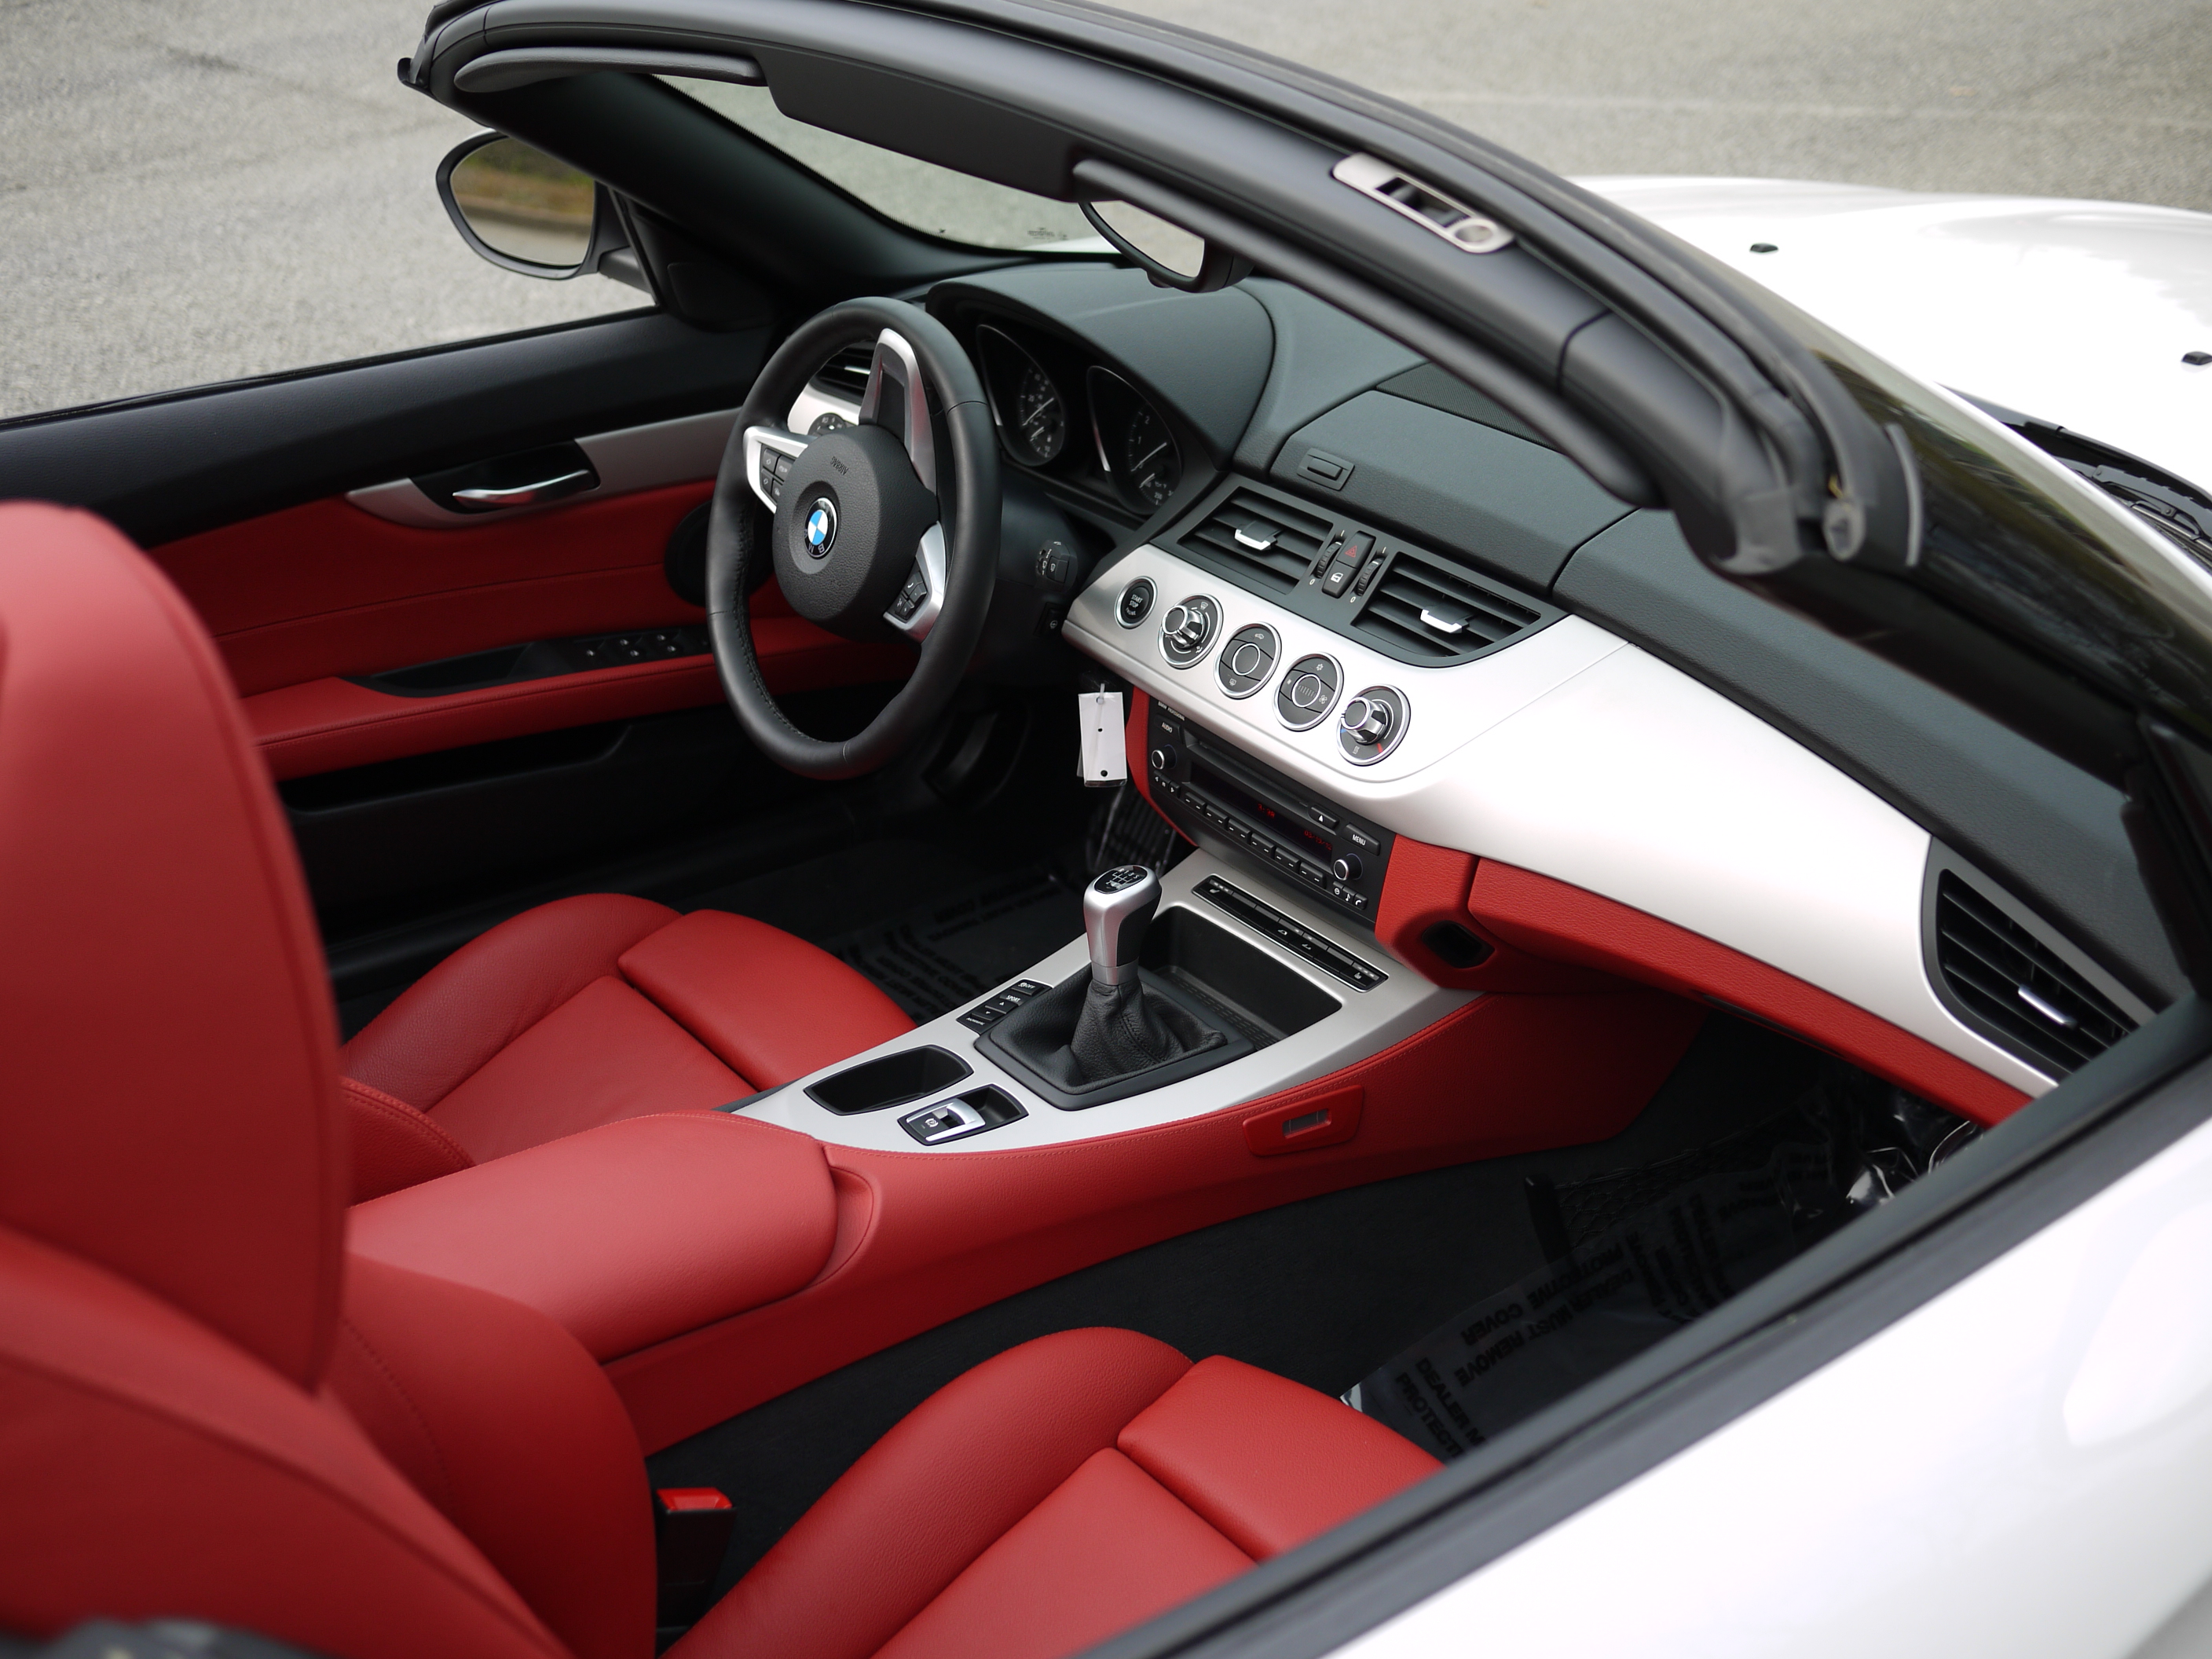 Sporty And Topless The E89 Bmw Z4 Select Luxury Cars